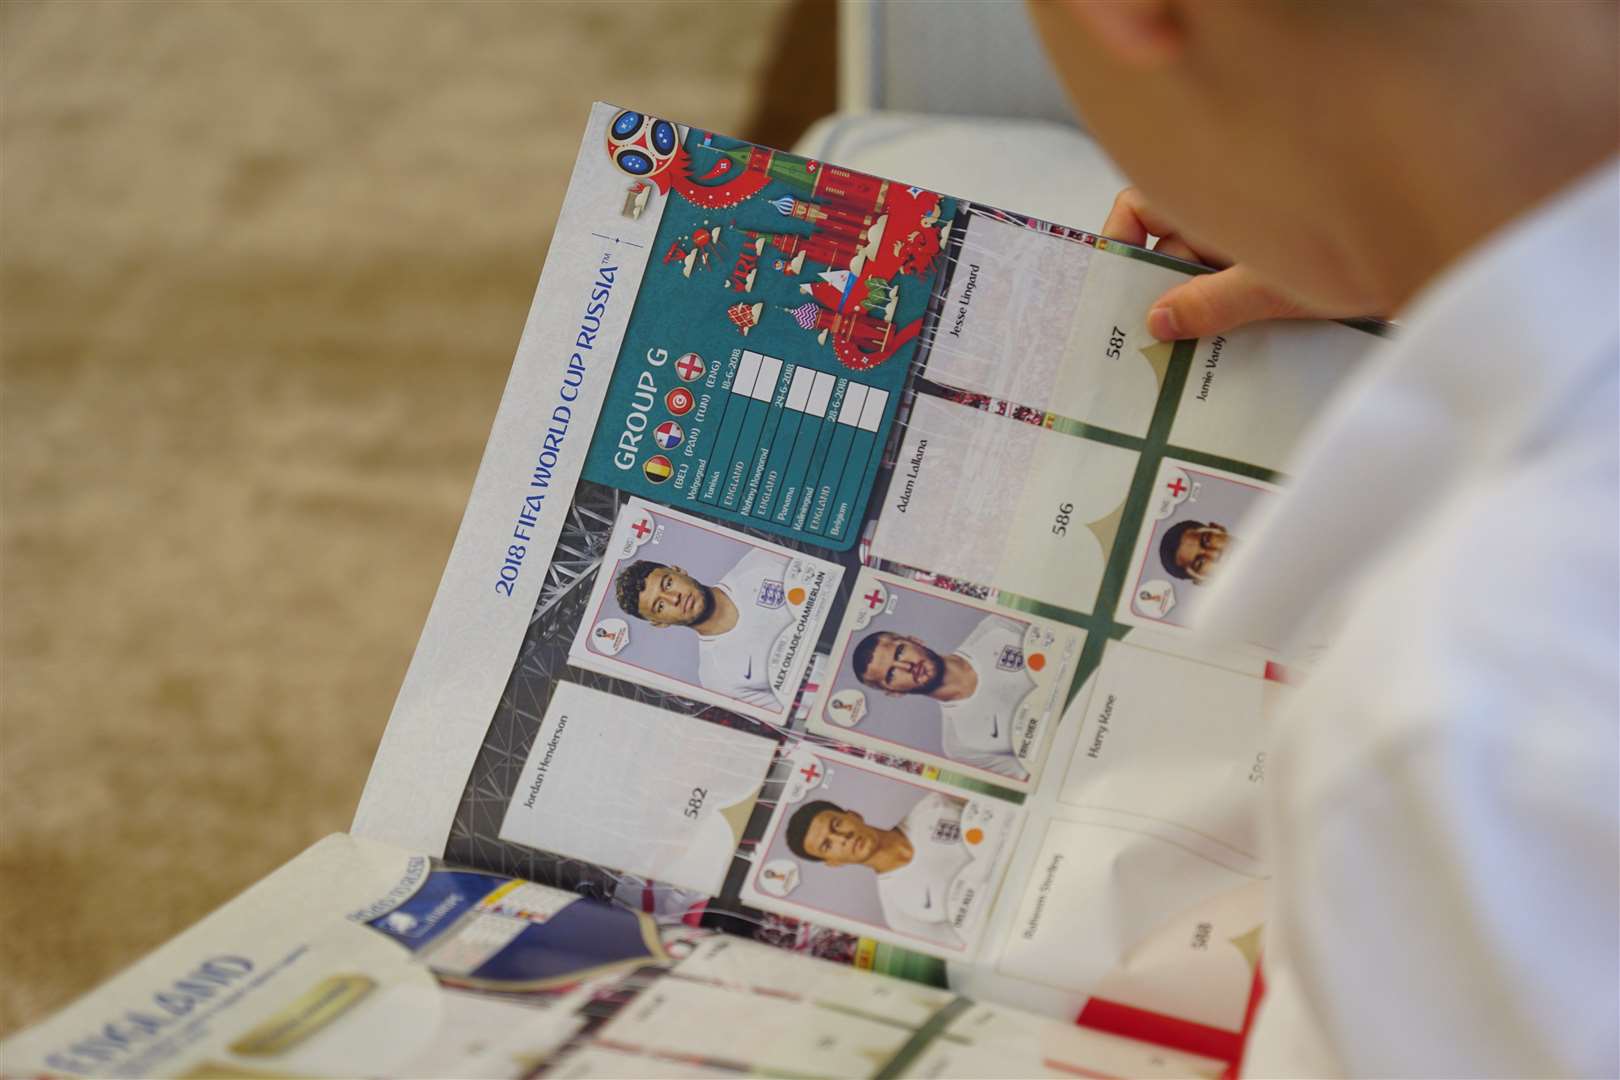 Panini has provided the ultimate playground trading currency - football stickers - for decades